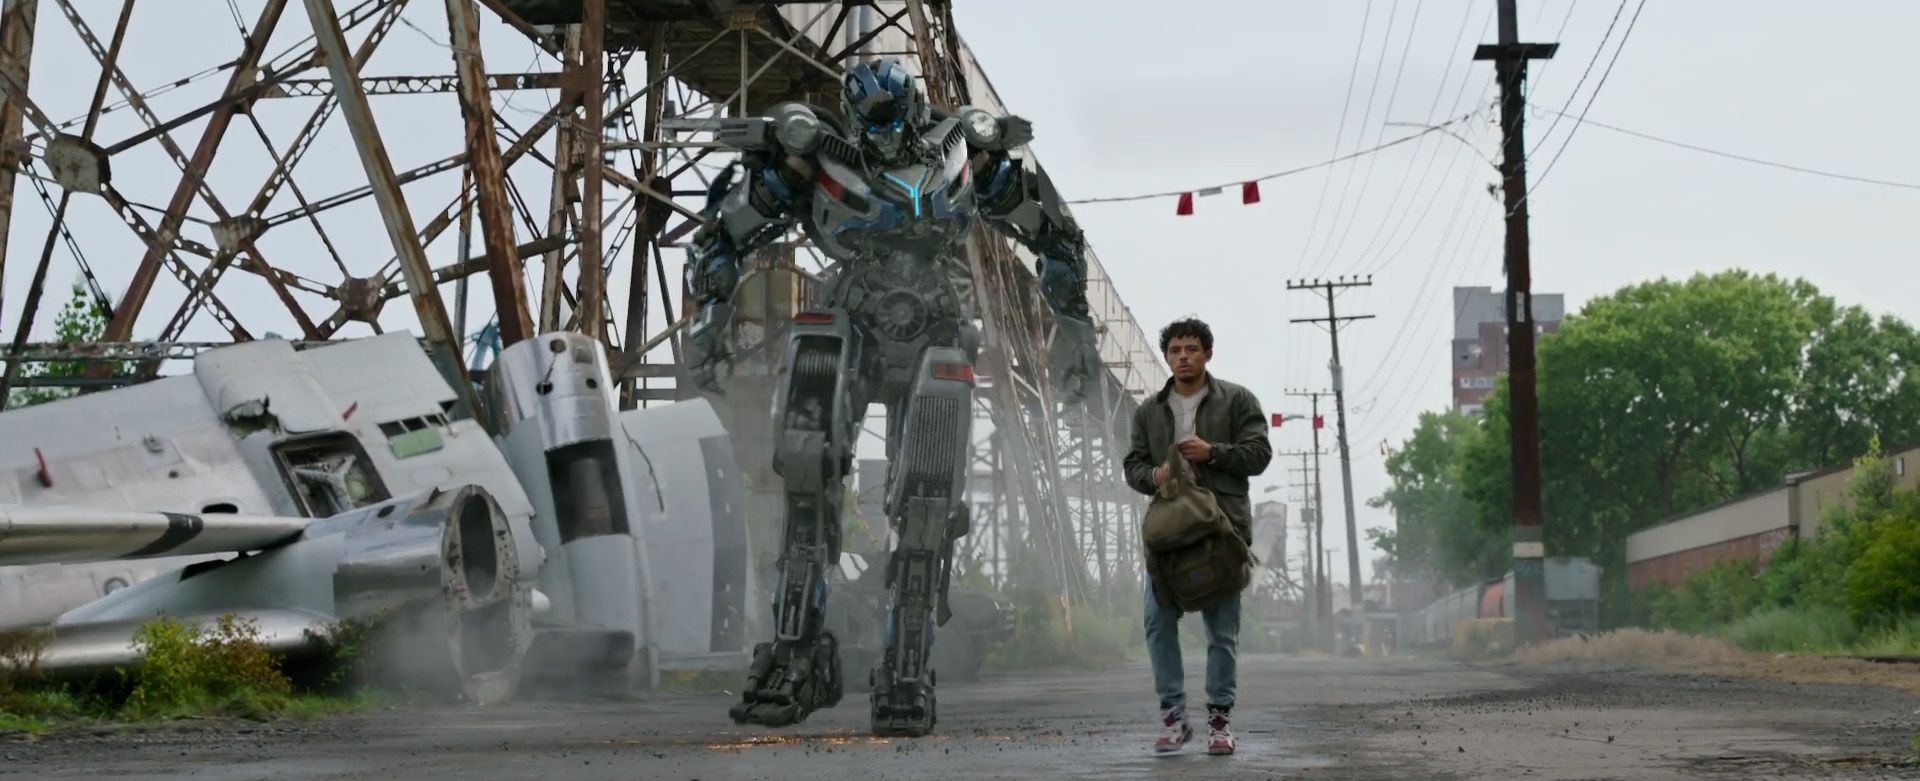 Transformers: Rise of the Beasts Anthony Ramos